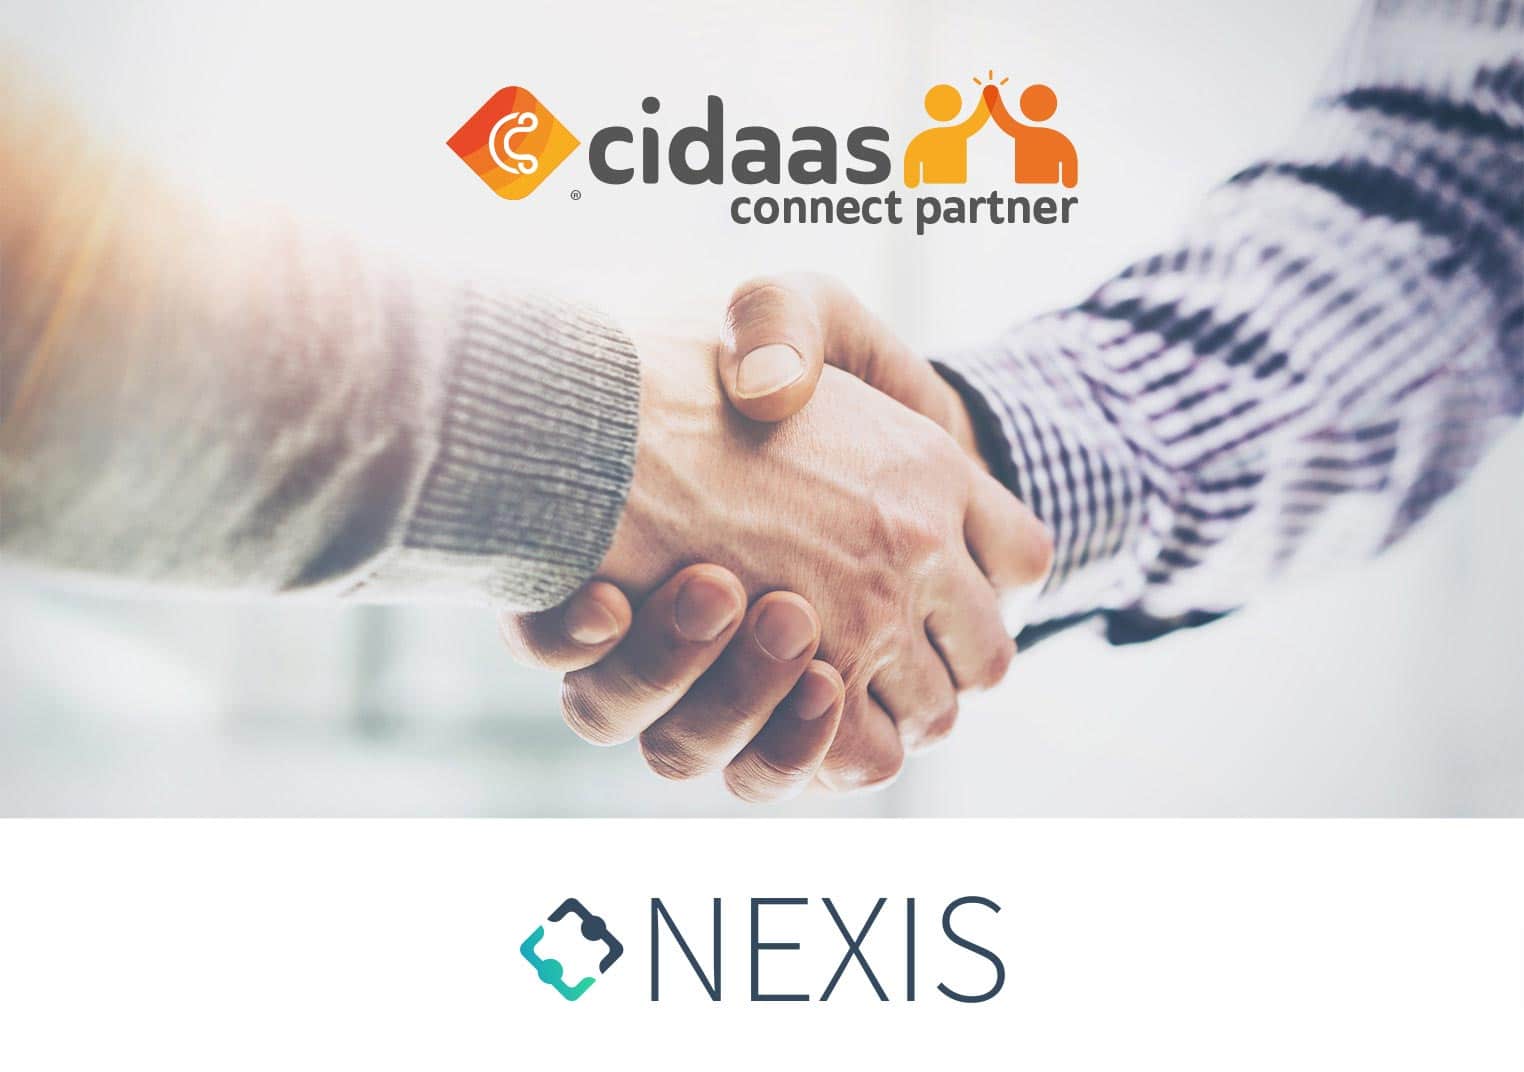 Nexis and cidaas enter into a partnership for world-class Identity & Access Management